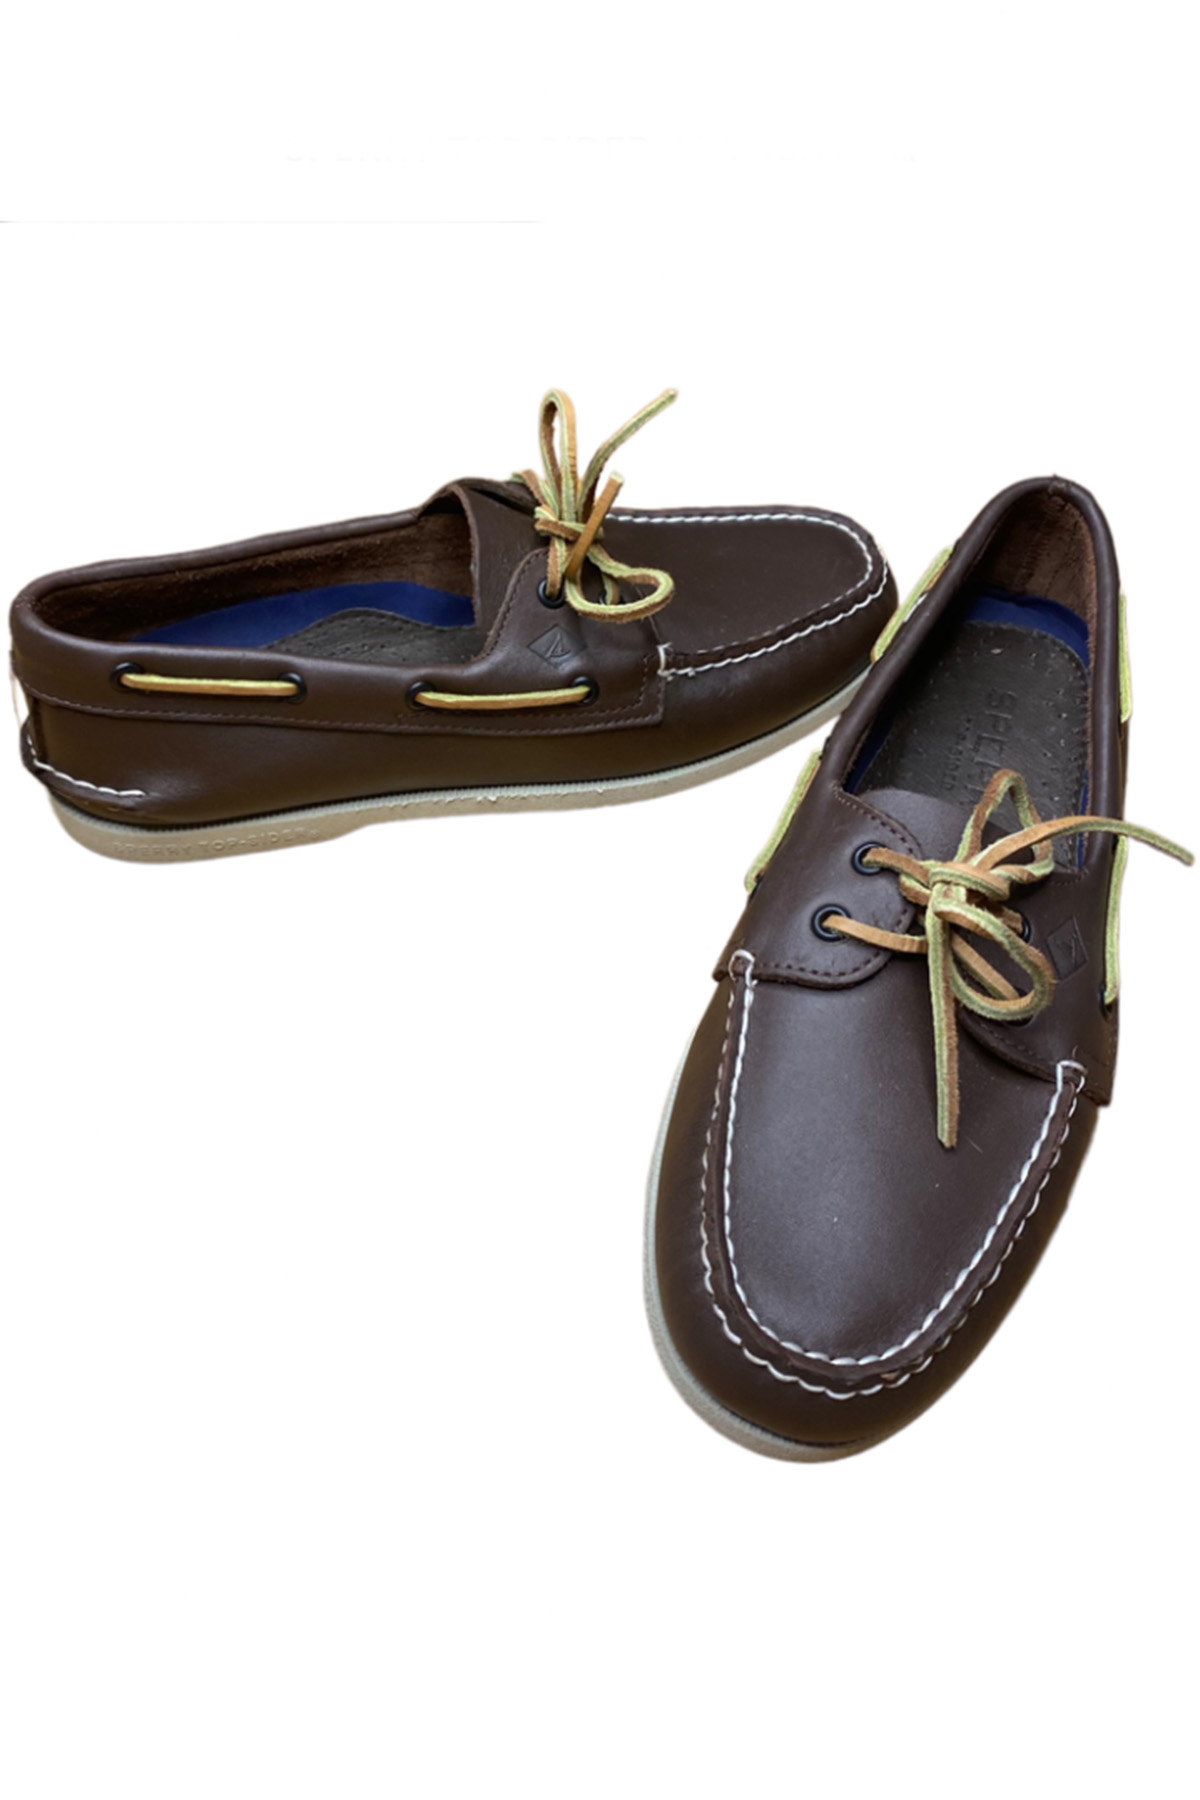 a pair of brown sperry boat shoes.